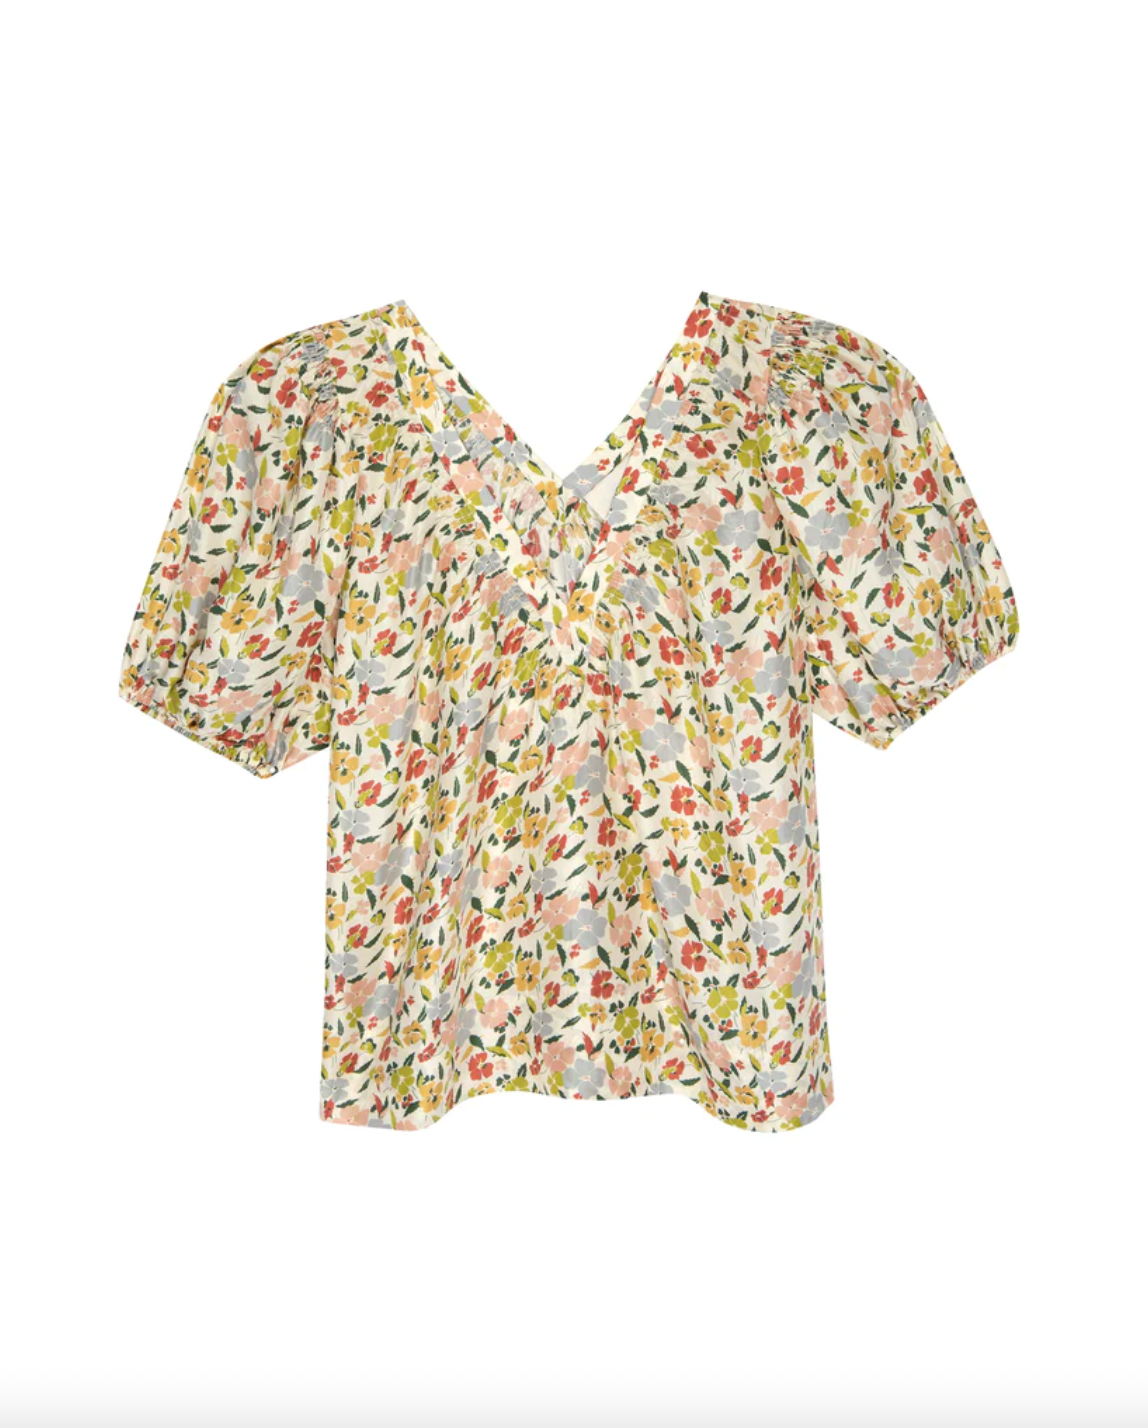 The Bungalow Top